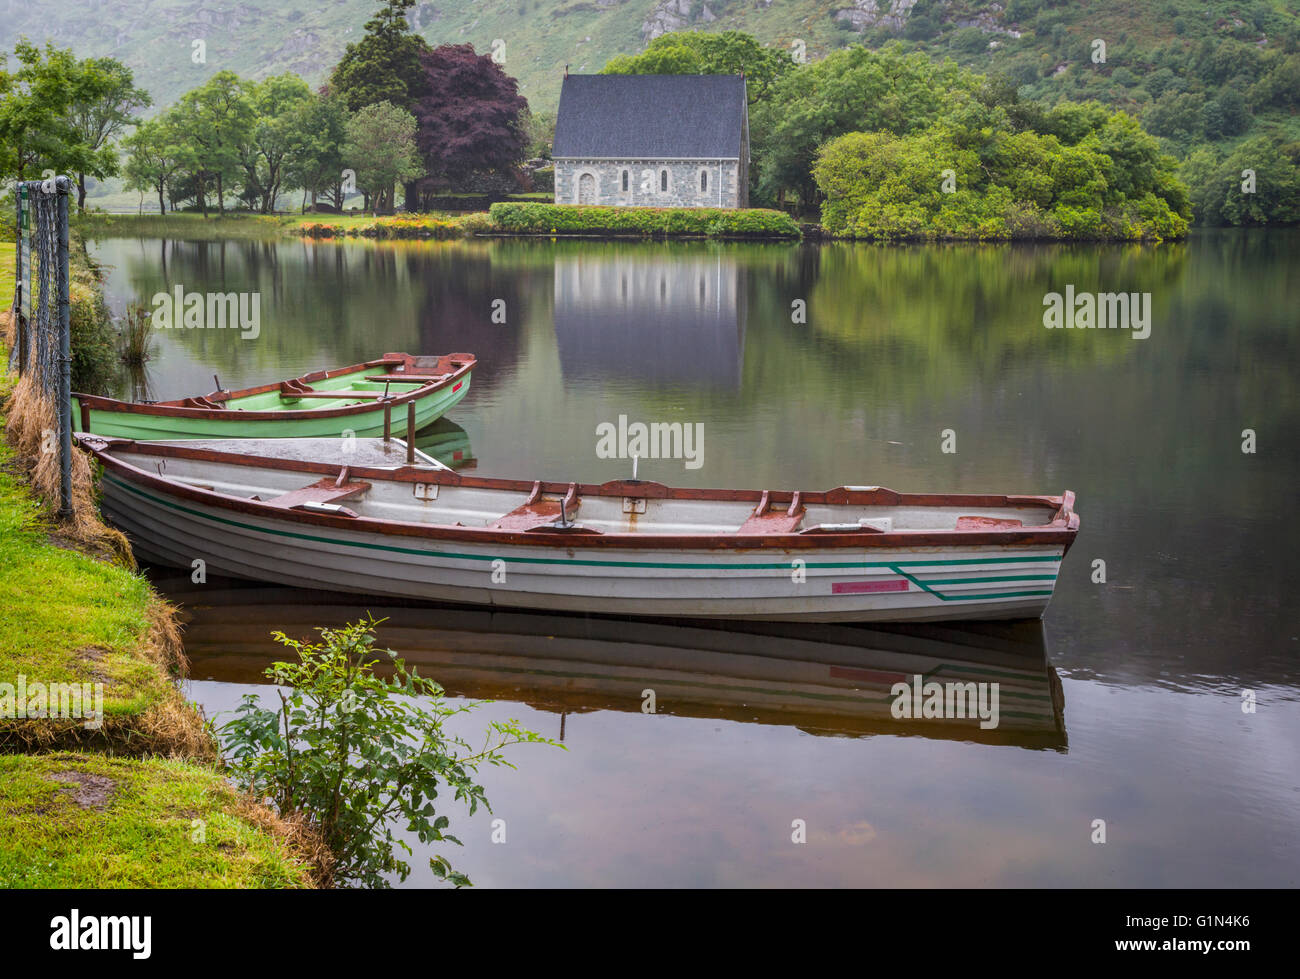 Gougane Barra, County Cork, Republic of Ireland.  Eire.  Looking across rowing boats moored at the lake shore with the Hermitage Stock Photo